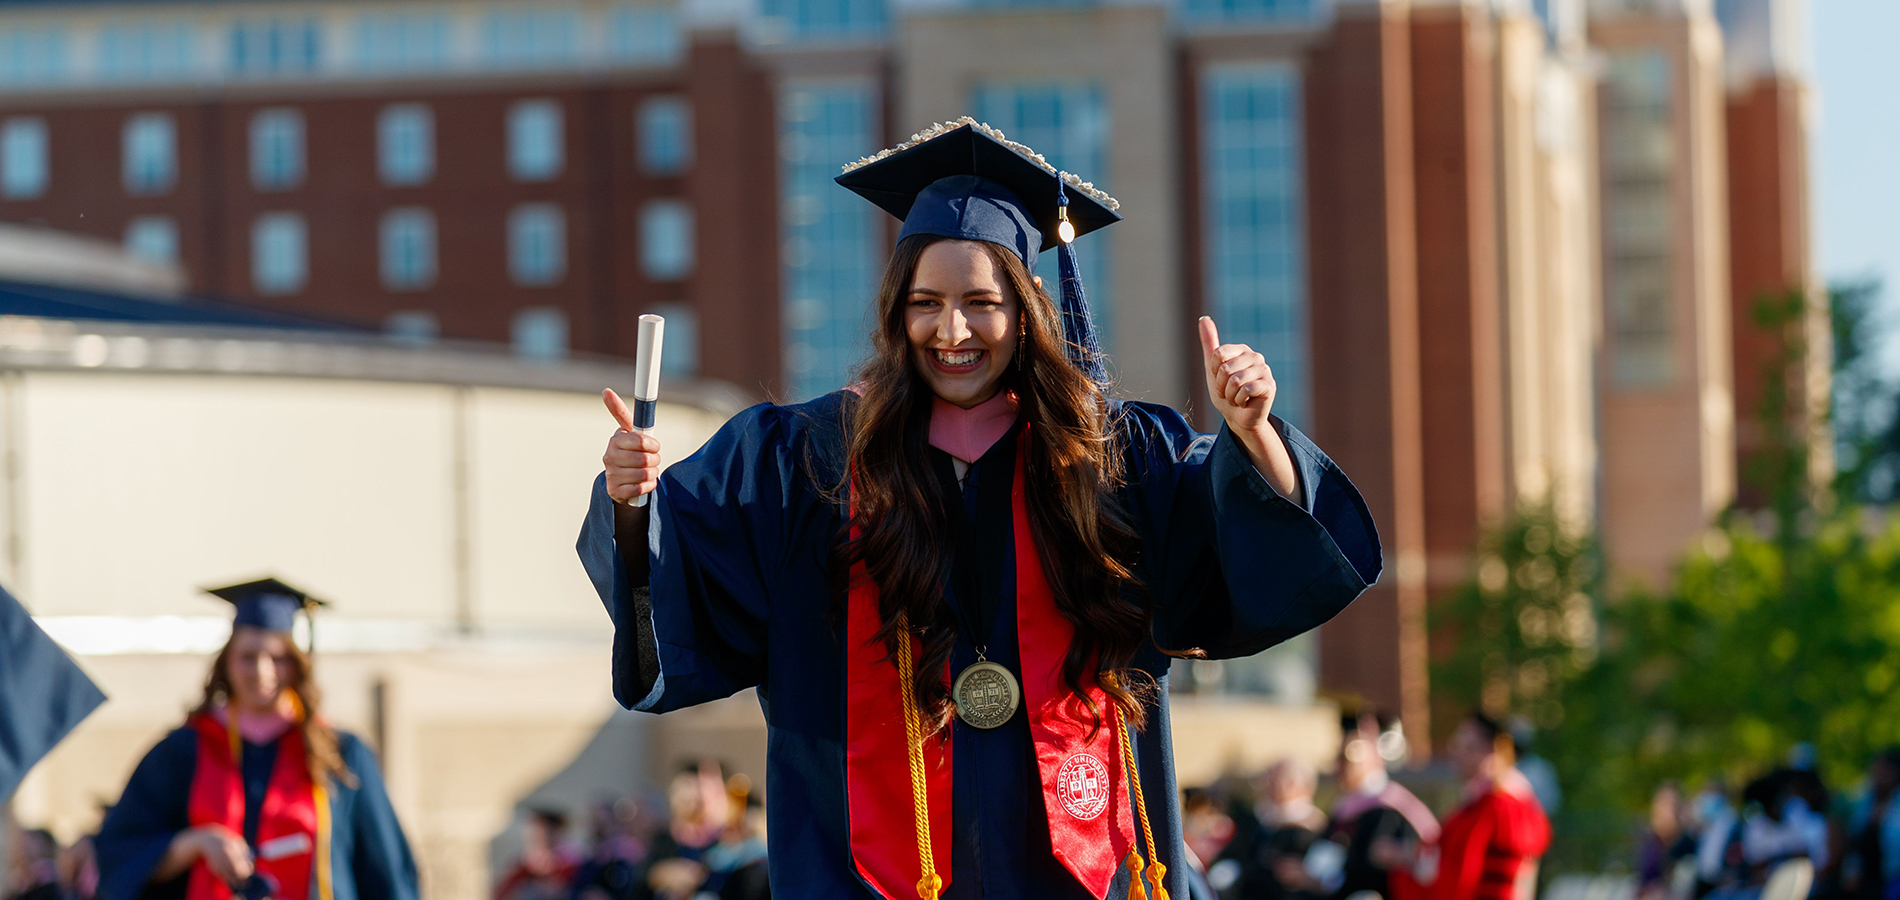 Celebrations underway for Liberty University’s 48th Commencement » Liberty News